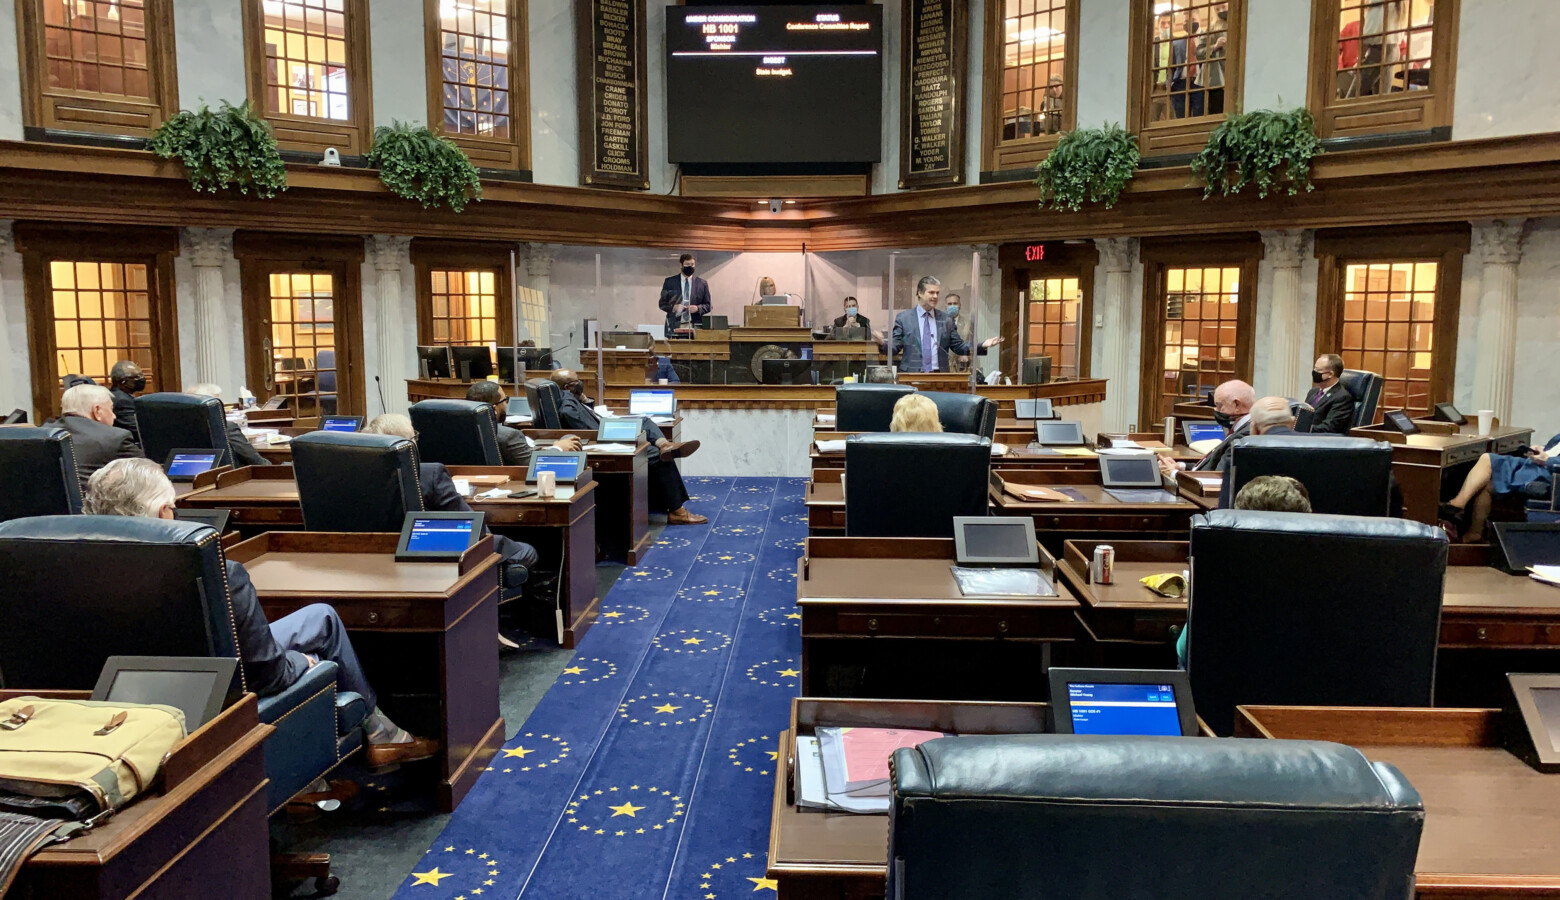 Senate lawmakers were divided between their chamber floor and the balcony for the 2021 legislative session, in order to better socially distance. (Brandon Smith/IPB News)